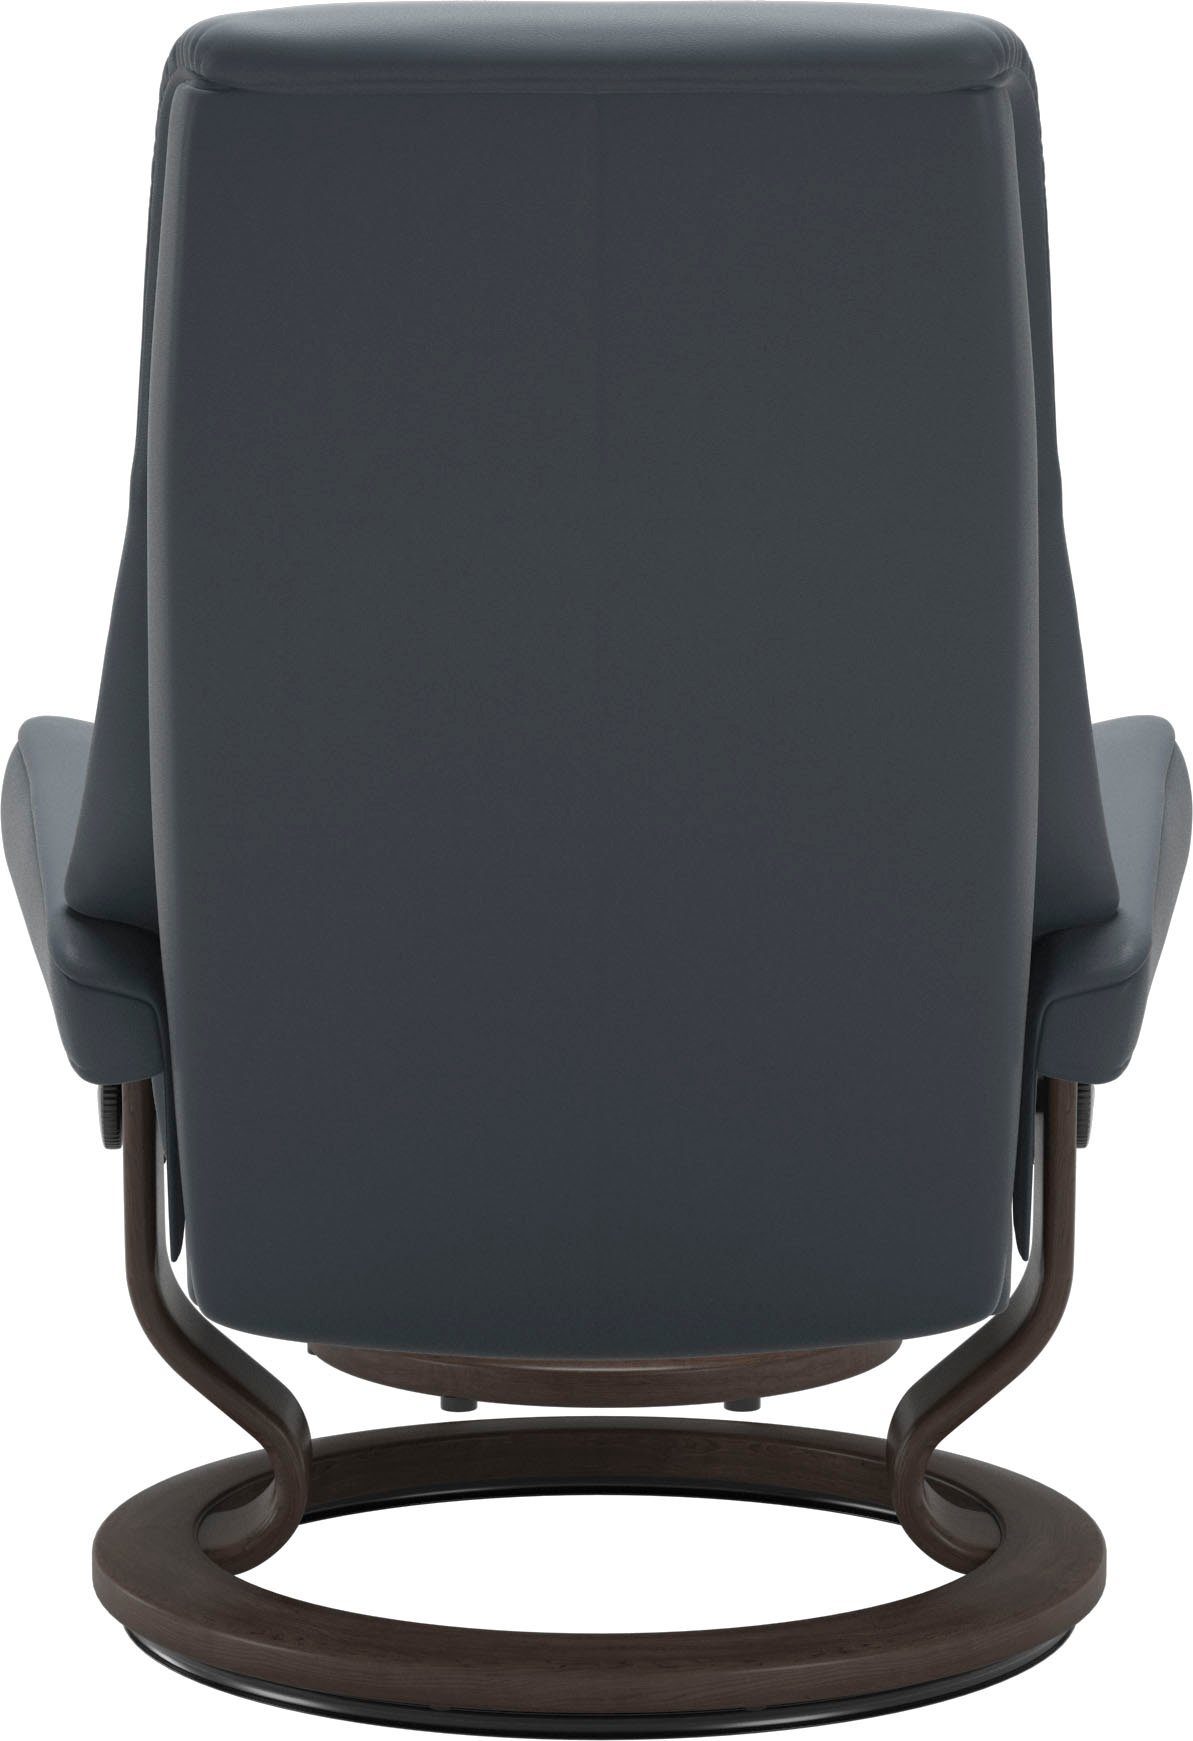 Base, mit View, Relaxsessel Stressless® Wenge Classic M,Gestell Größe